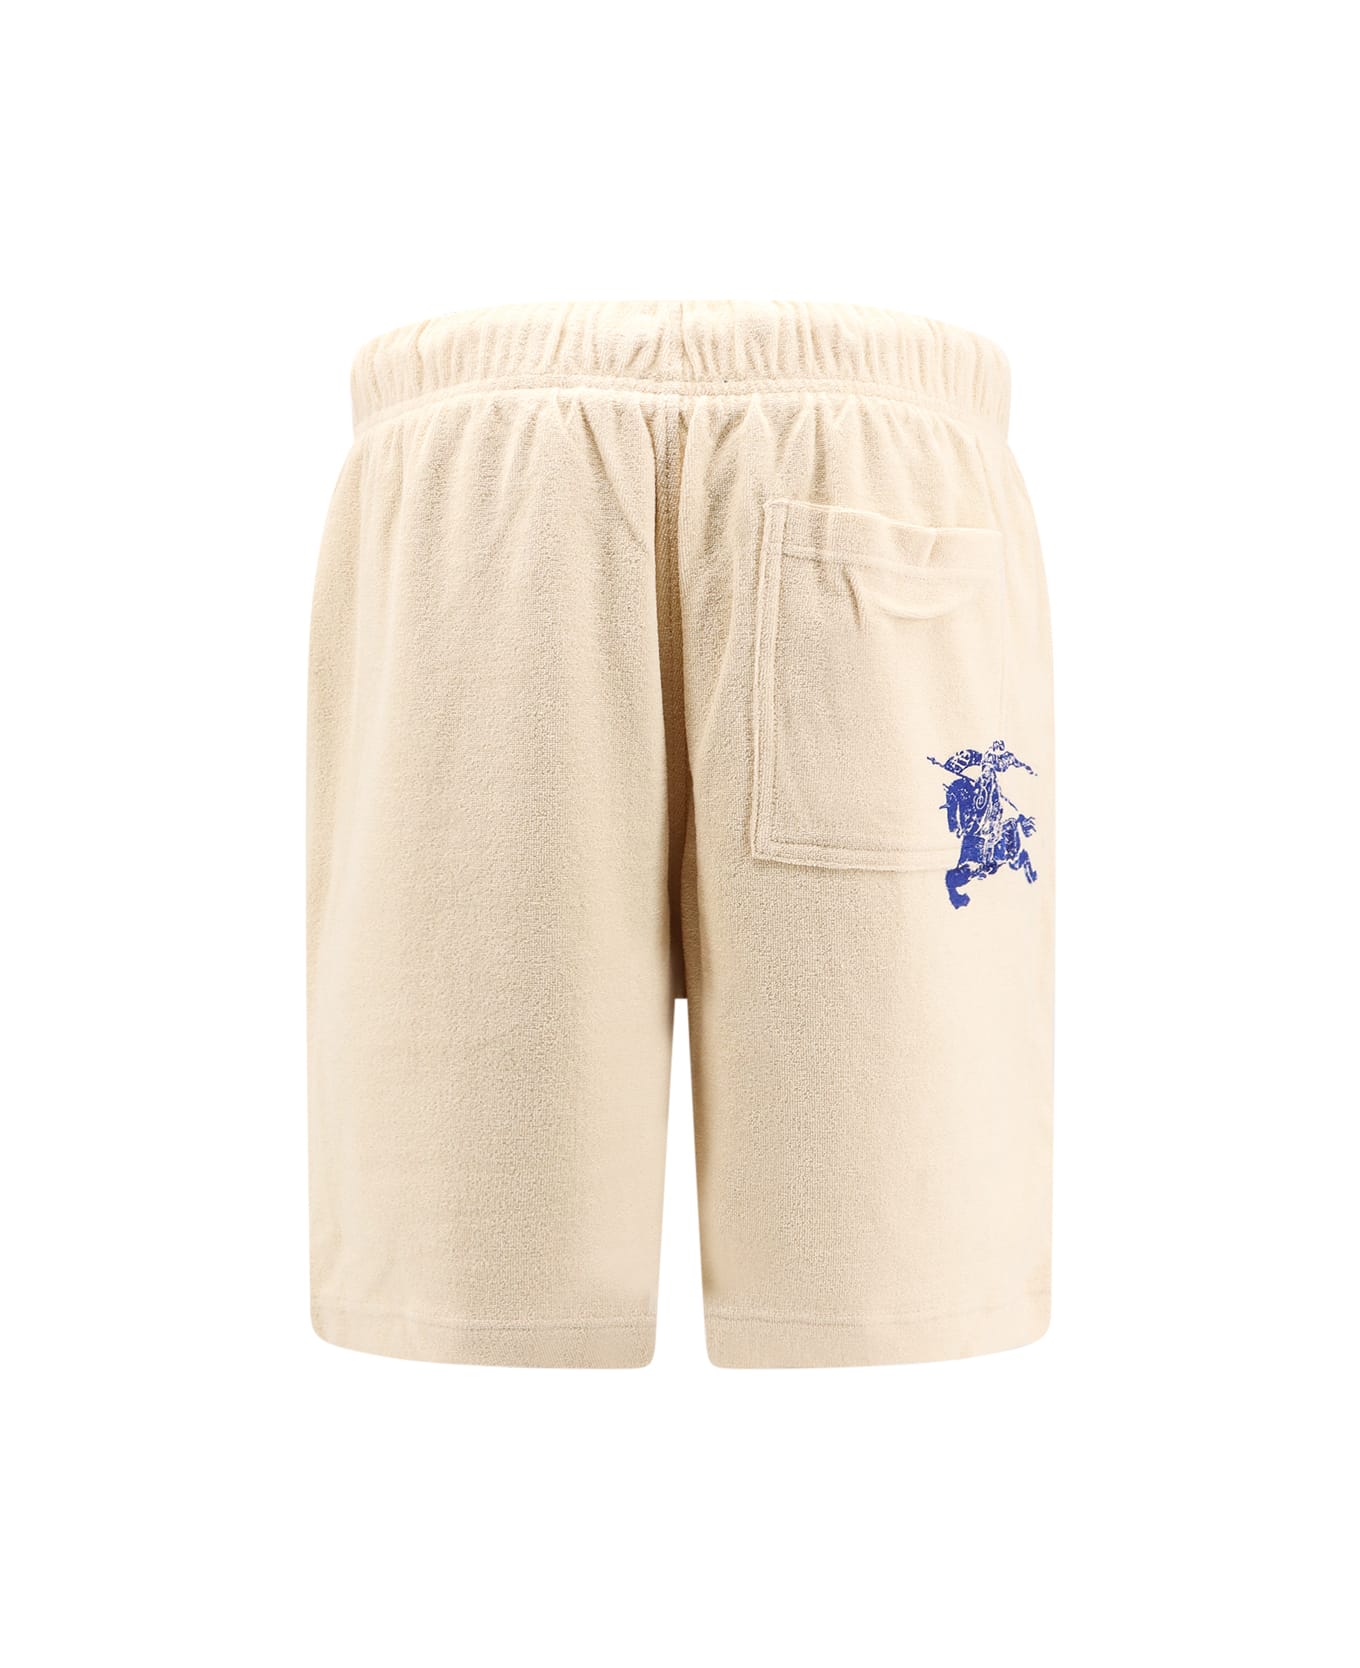 Burberry Cotton Towelling Shorts - Beige